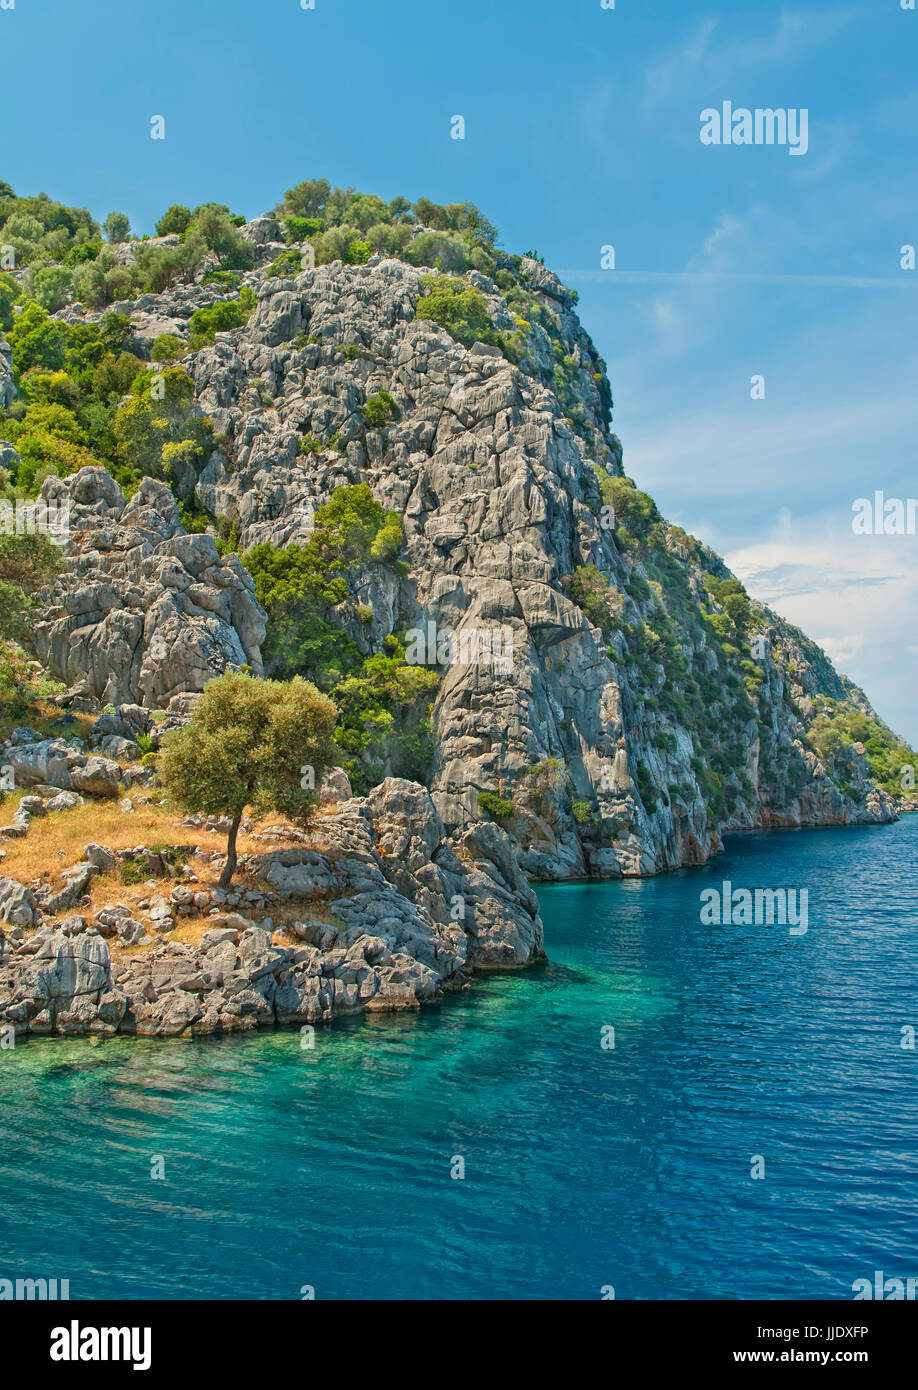 rocky island with trees surrounded by turquoise blue waters of Aegean sea on sunny summer day, Marmars, Turkey Stock Photo